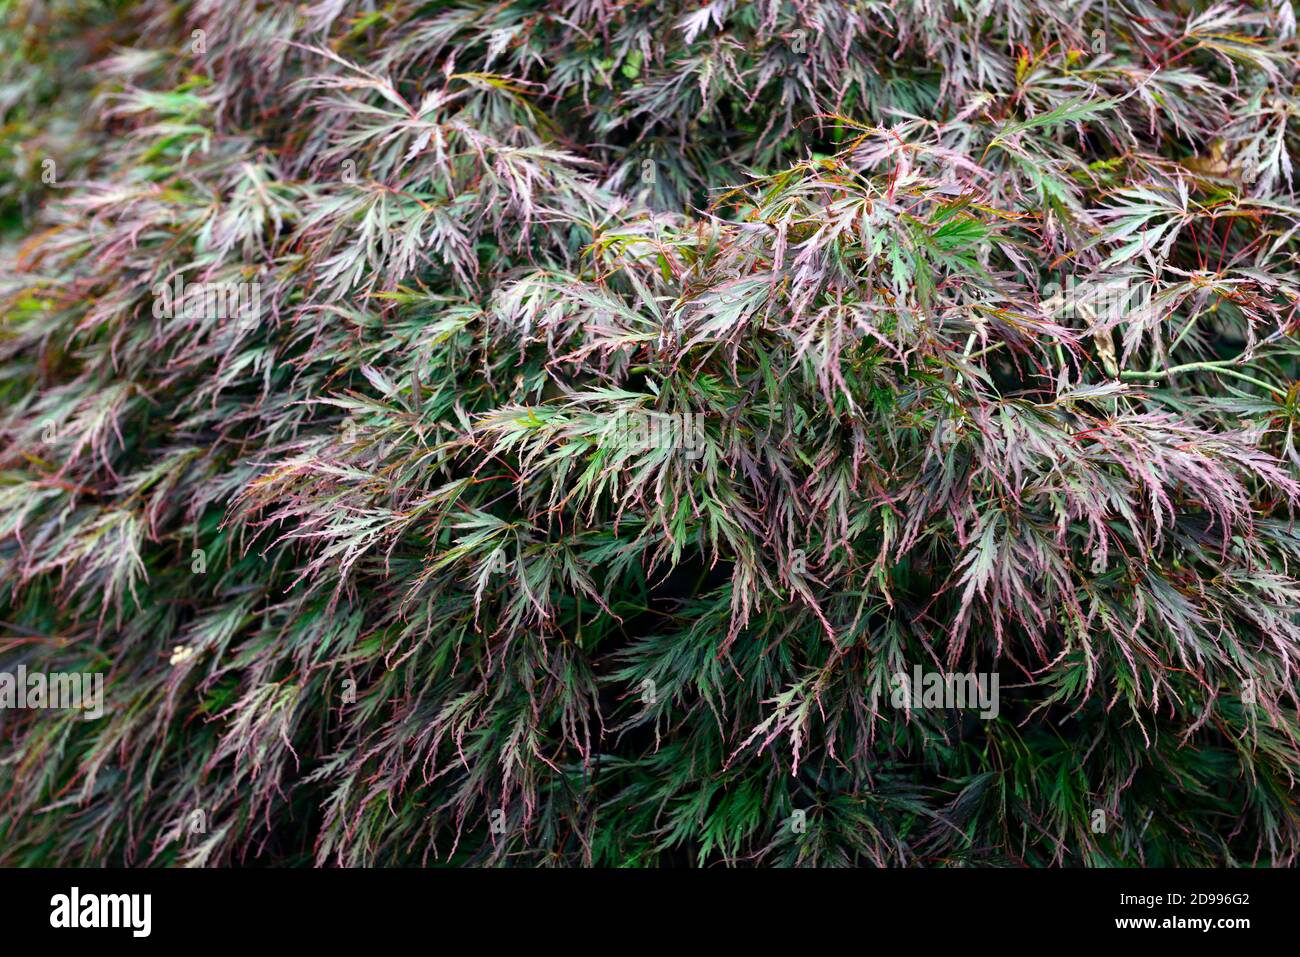 acer palmatum dissectum,green purple leaves,dissected foliage,shrubs,oriental maples,japanese maple,deciduous tree,RM Floral Stock Photo